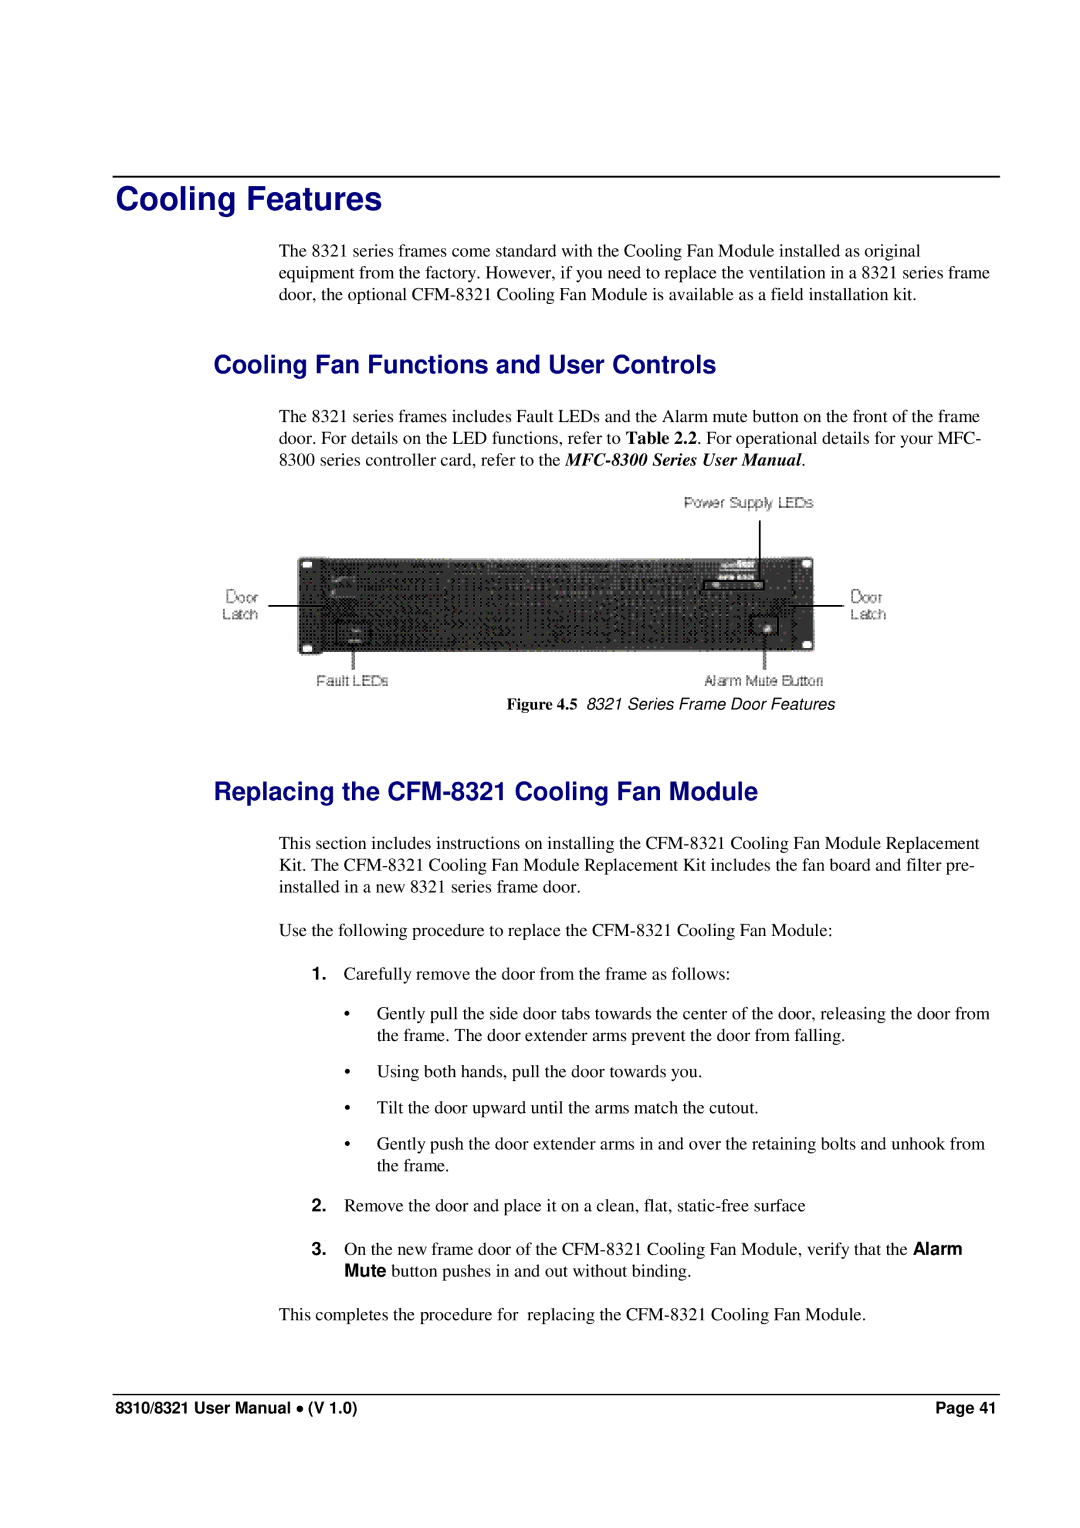 Cobalt Networks 8321(-C), 8310(-C) user manual Cooling Features 